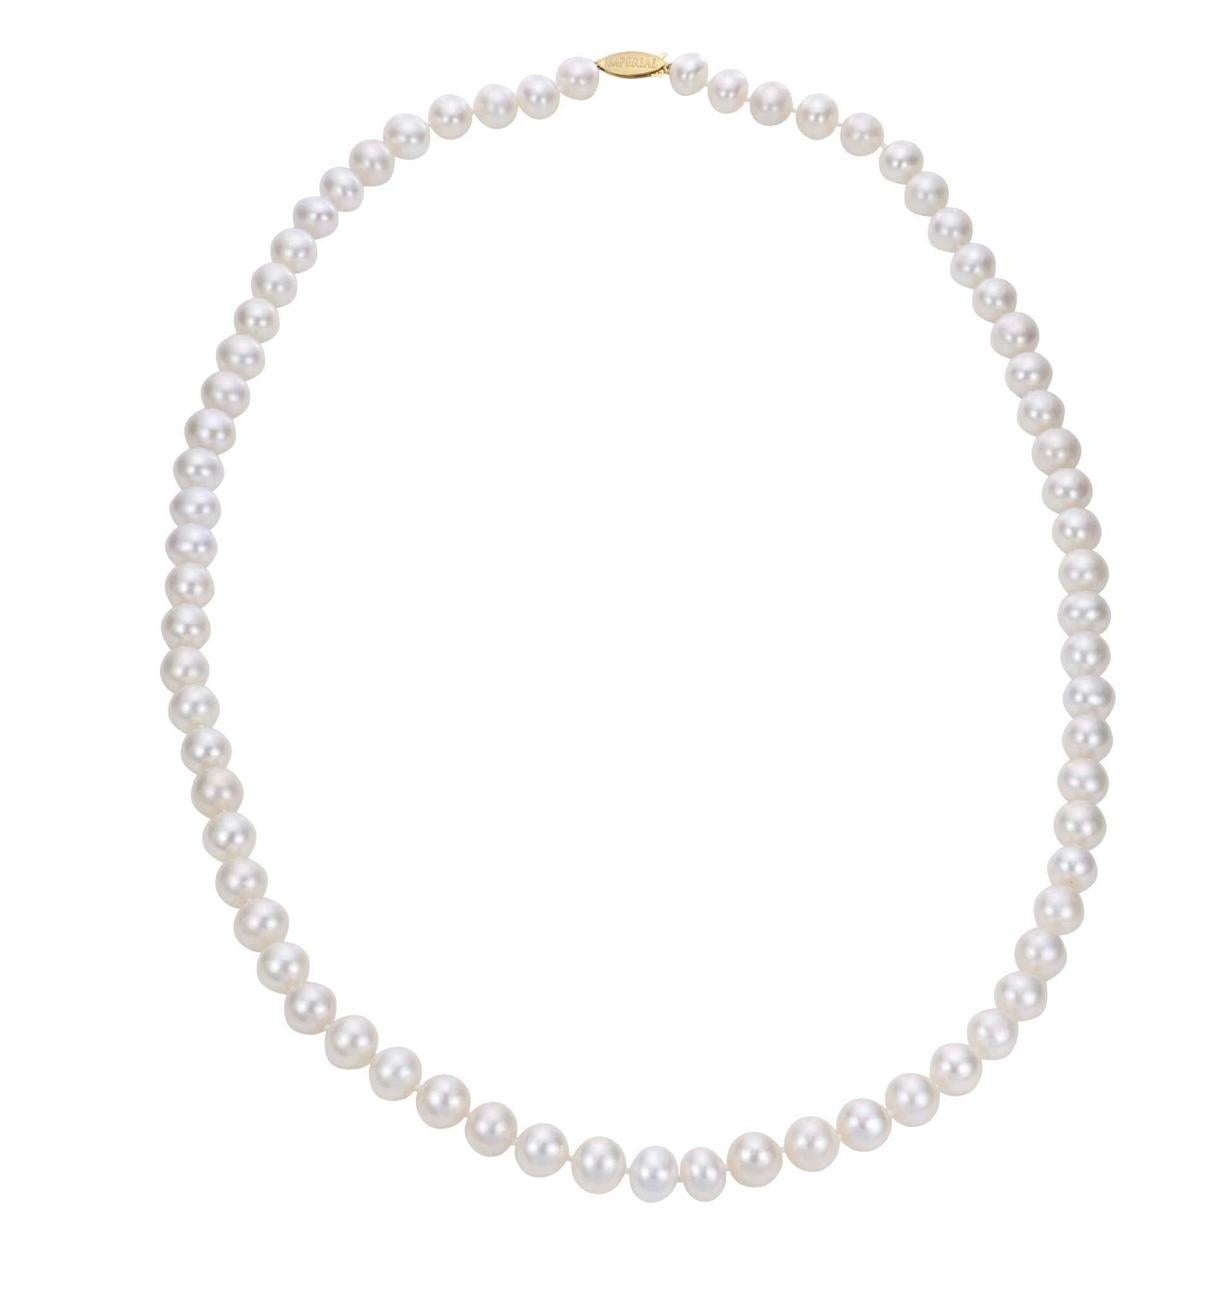 This marvelous vintage Pearl necklace features 1 row of luscious  Japanese Akoya   pearls with 14 karat yellow gold
(measuring approx. 6.5 mm 
White color
VINTAGE

PRE-OWNED 
 ESTATE PIECE

Length of  Strand including clasp  24  Inch
PEARLS ARE